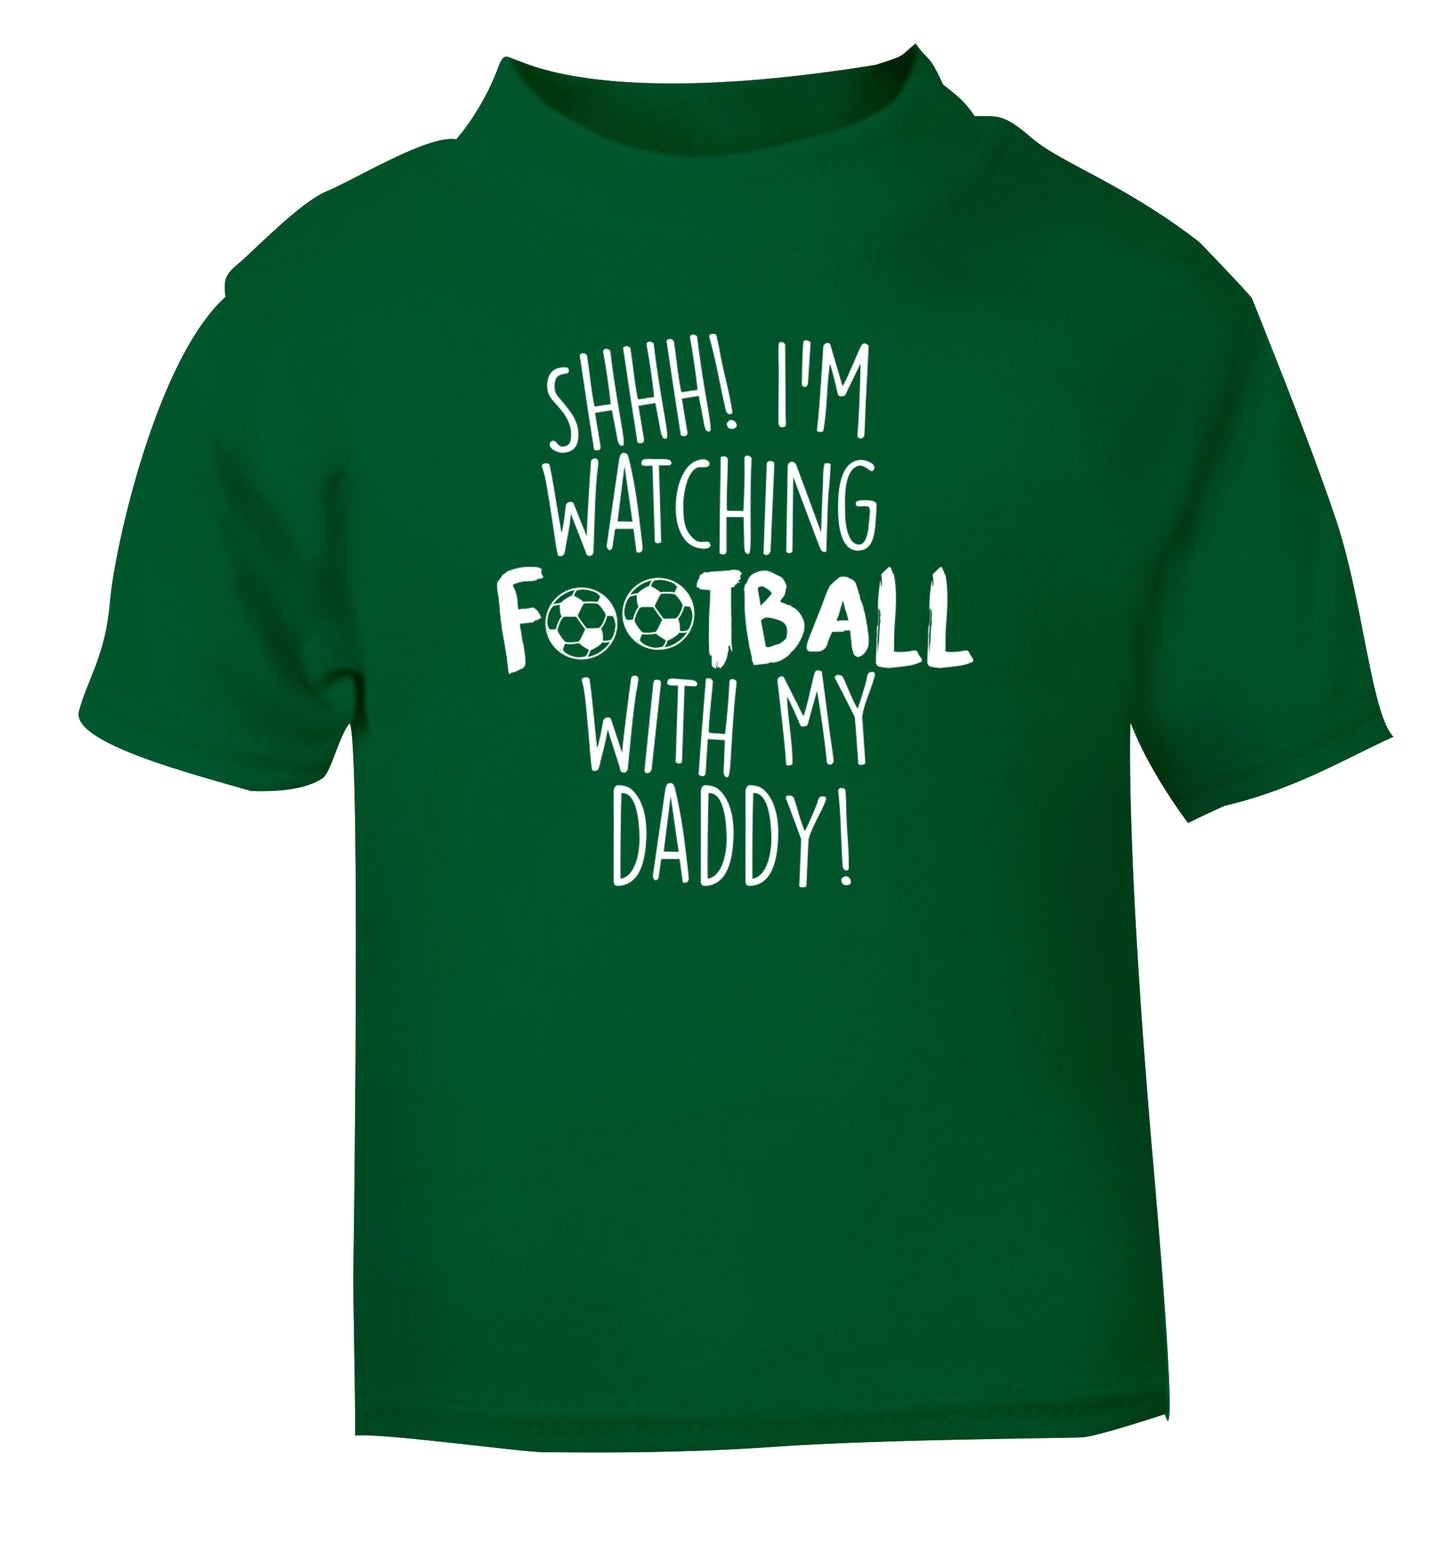 Shhh I'm watching football with my daddy green Baby Toddler Tshirt 2 Years